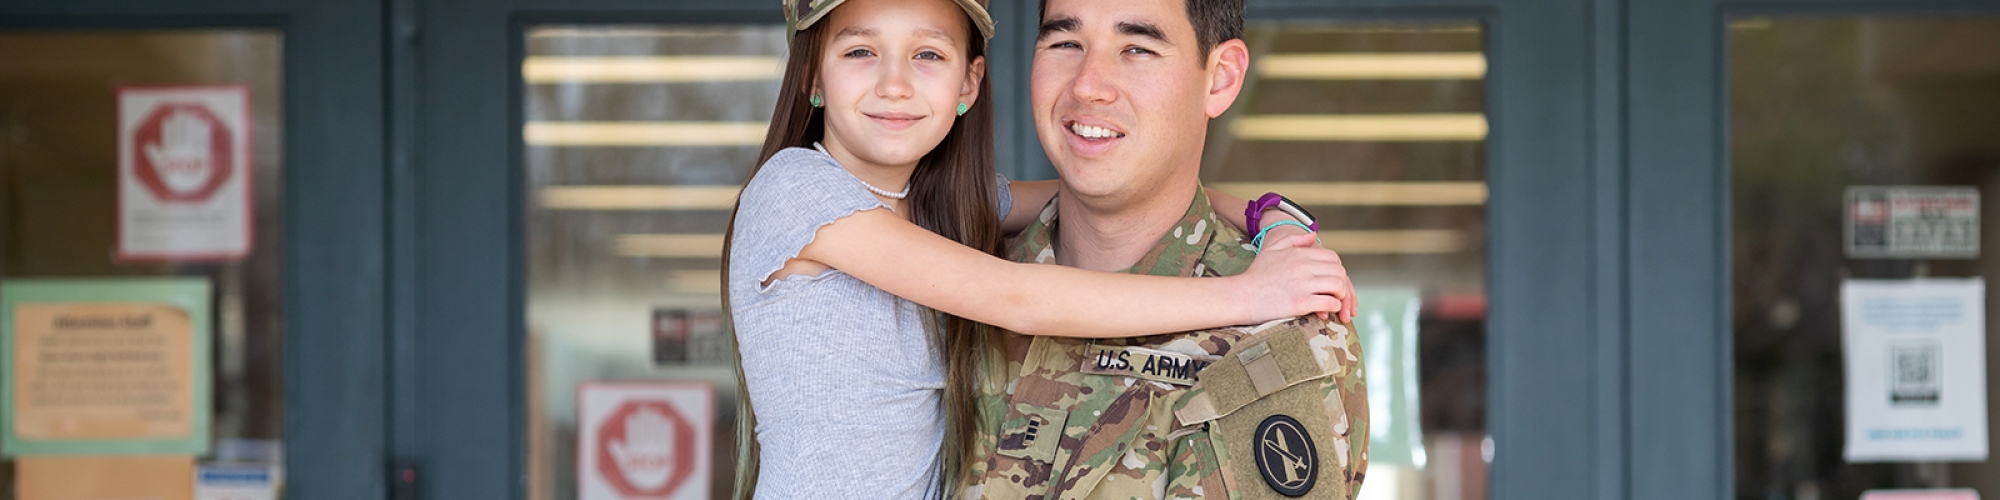 Dad in military uniform with daughter